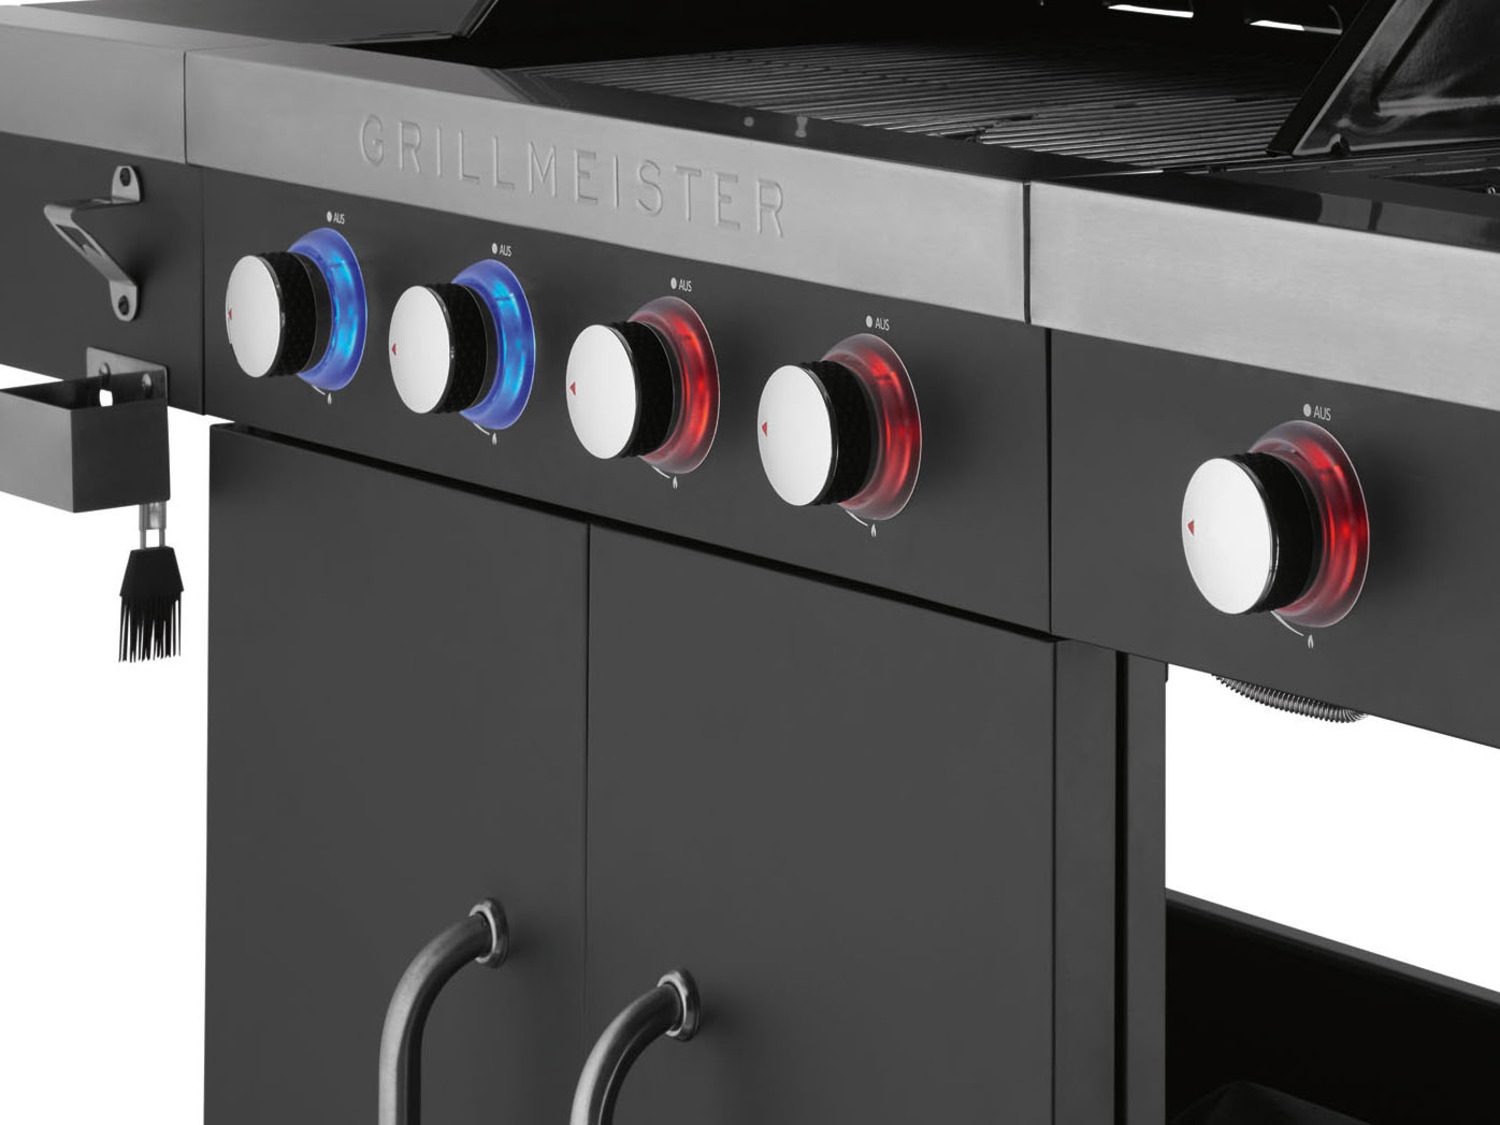 Brenner, 19,7 Gasgrill, kW GRILLMEISTER | LIDL 4plus1